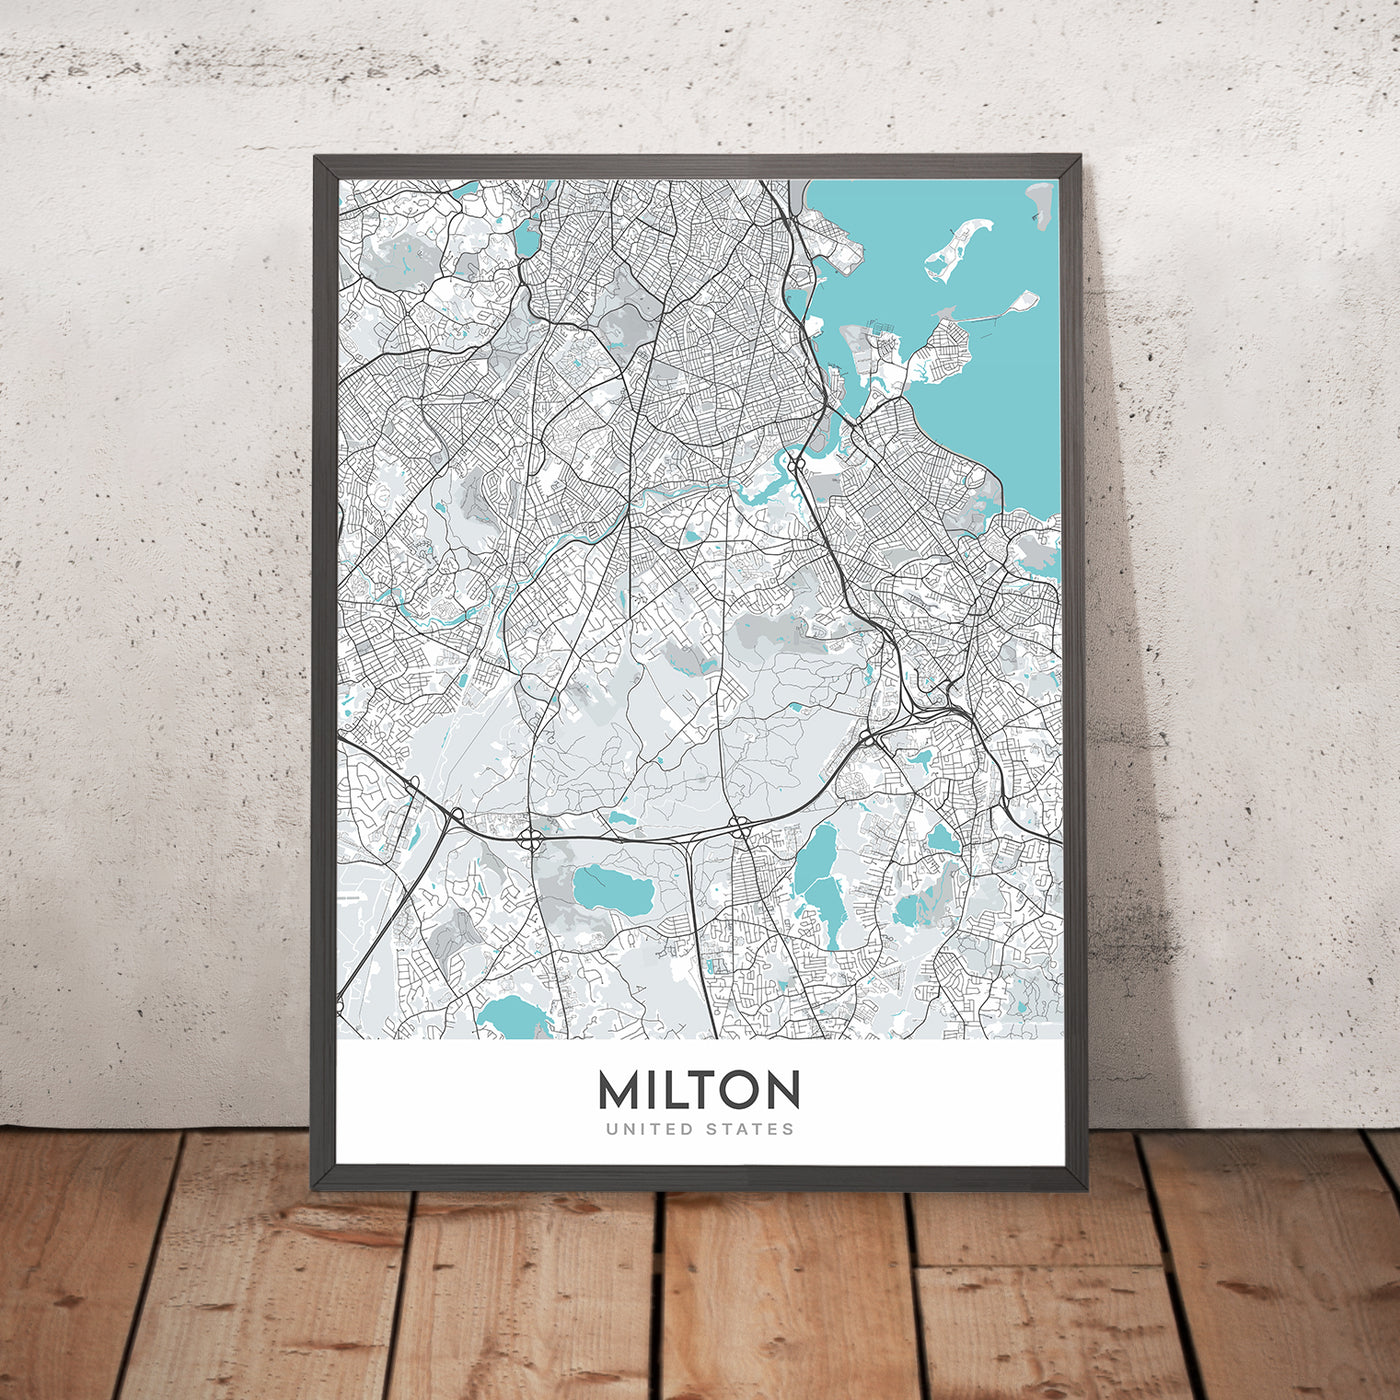 Modern City Map of Milton, MA: Blue Hills Reservation, Cunningham Park, Houghton's Pond, Chickatawbut Hill, Blue Hill Avenue